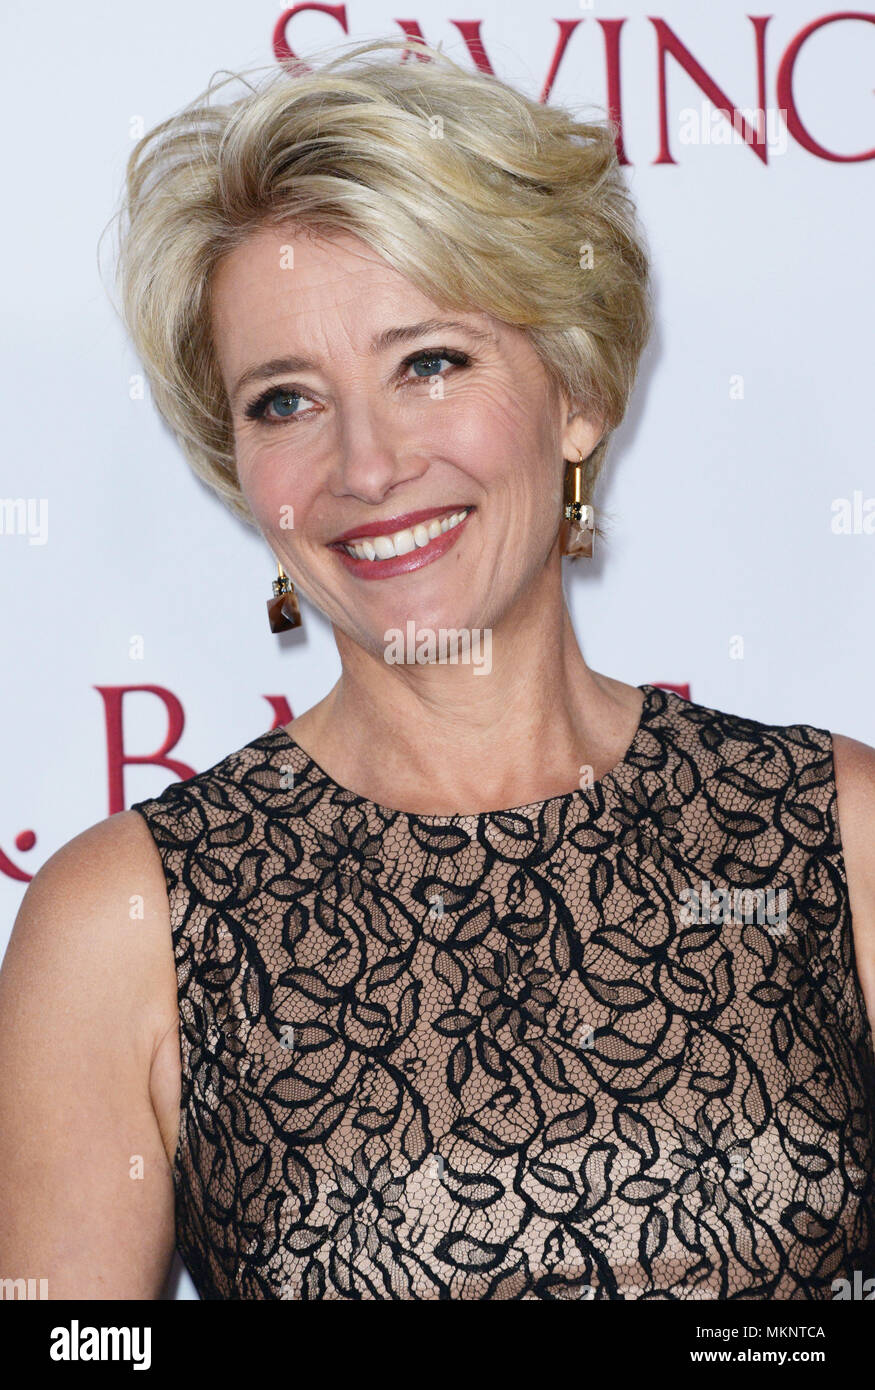 Emma Thompson 012 at the premiere of 'Saving Mr. Banks' on the Disney  Studio Lo in  Thompson 012 Red Carpet Event, Vertical, USA,  Film Industry, Celebrities, Photography, Bestof, Arts Culture and